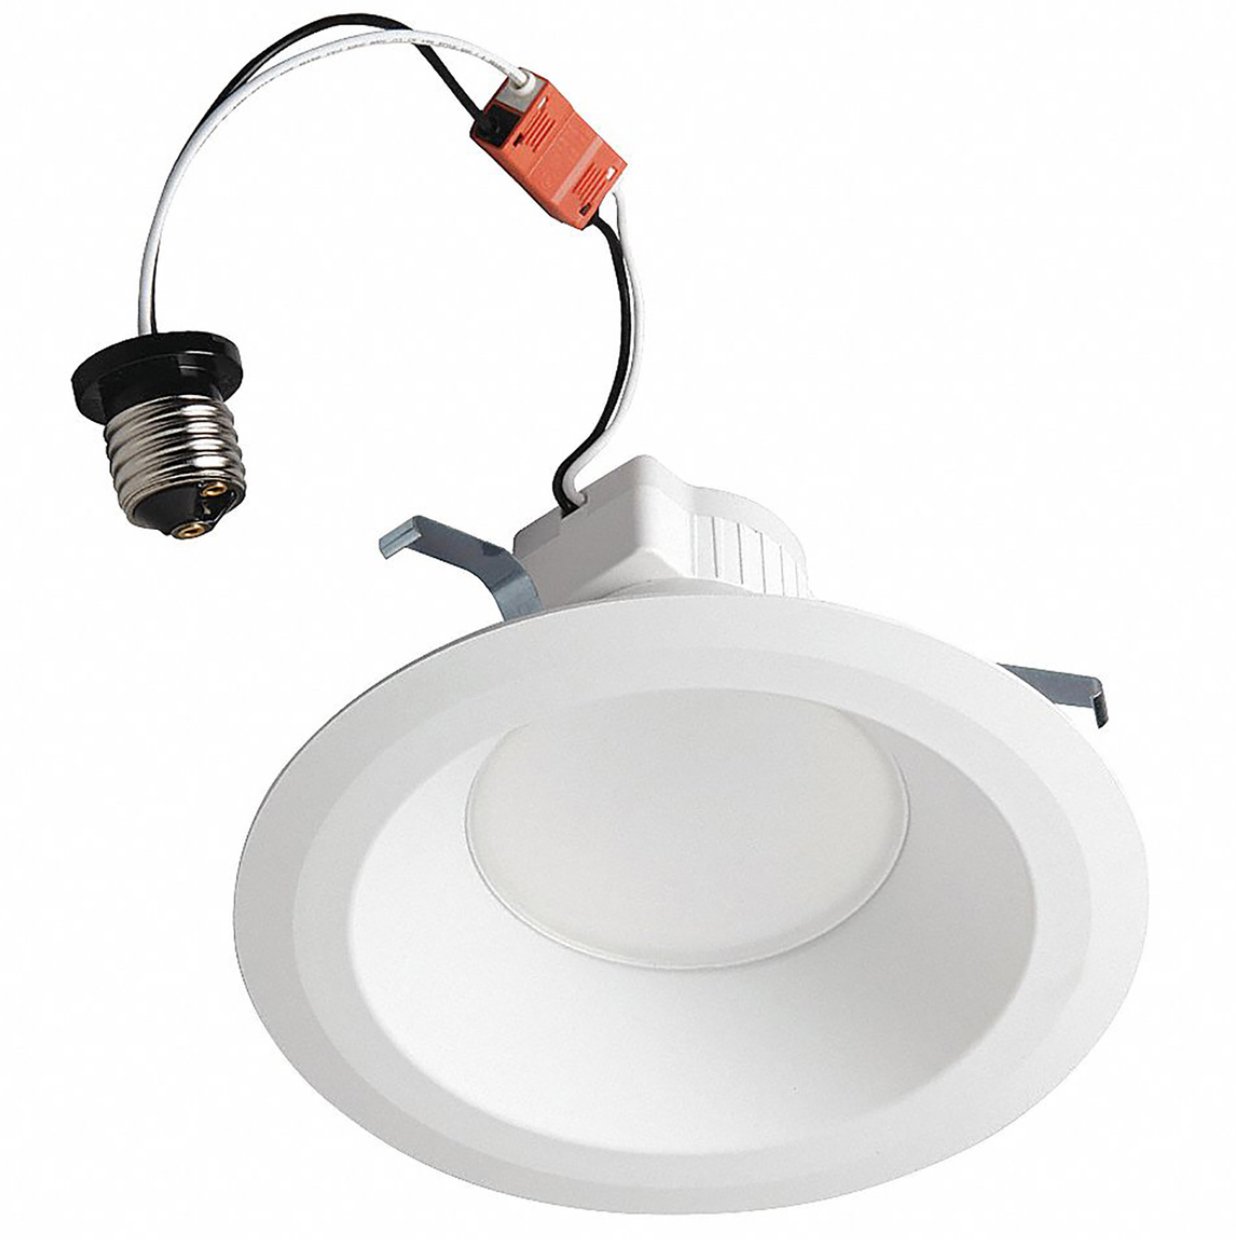 Why Recessed Lighting?